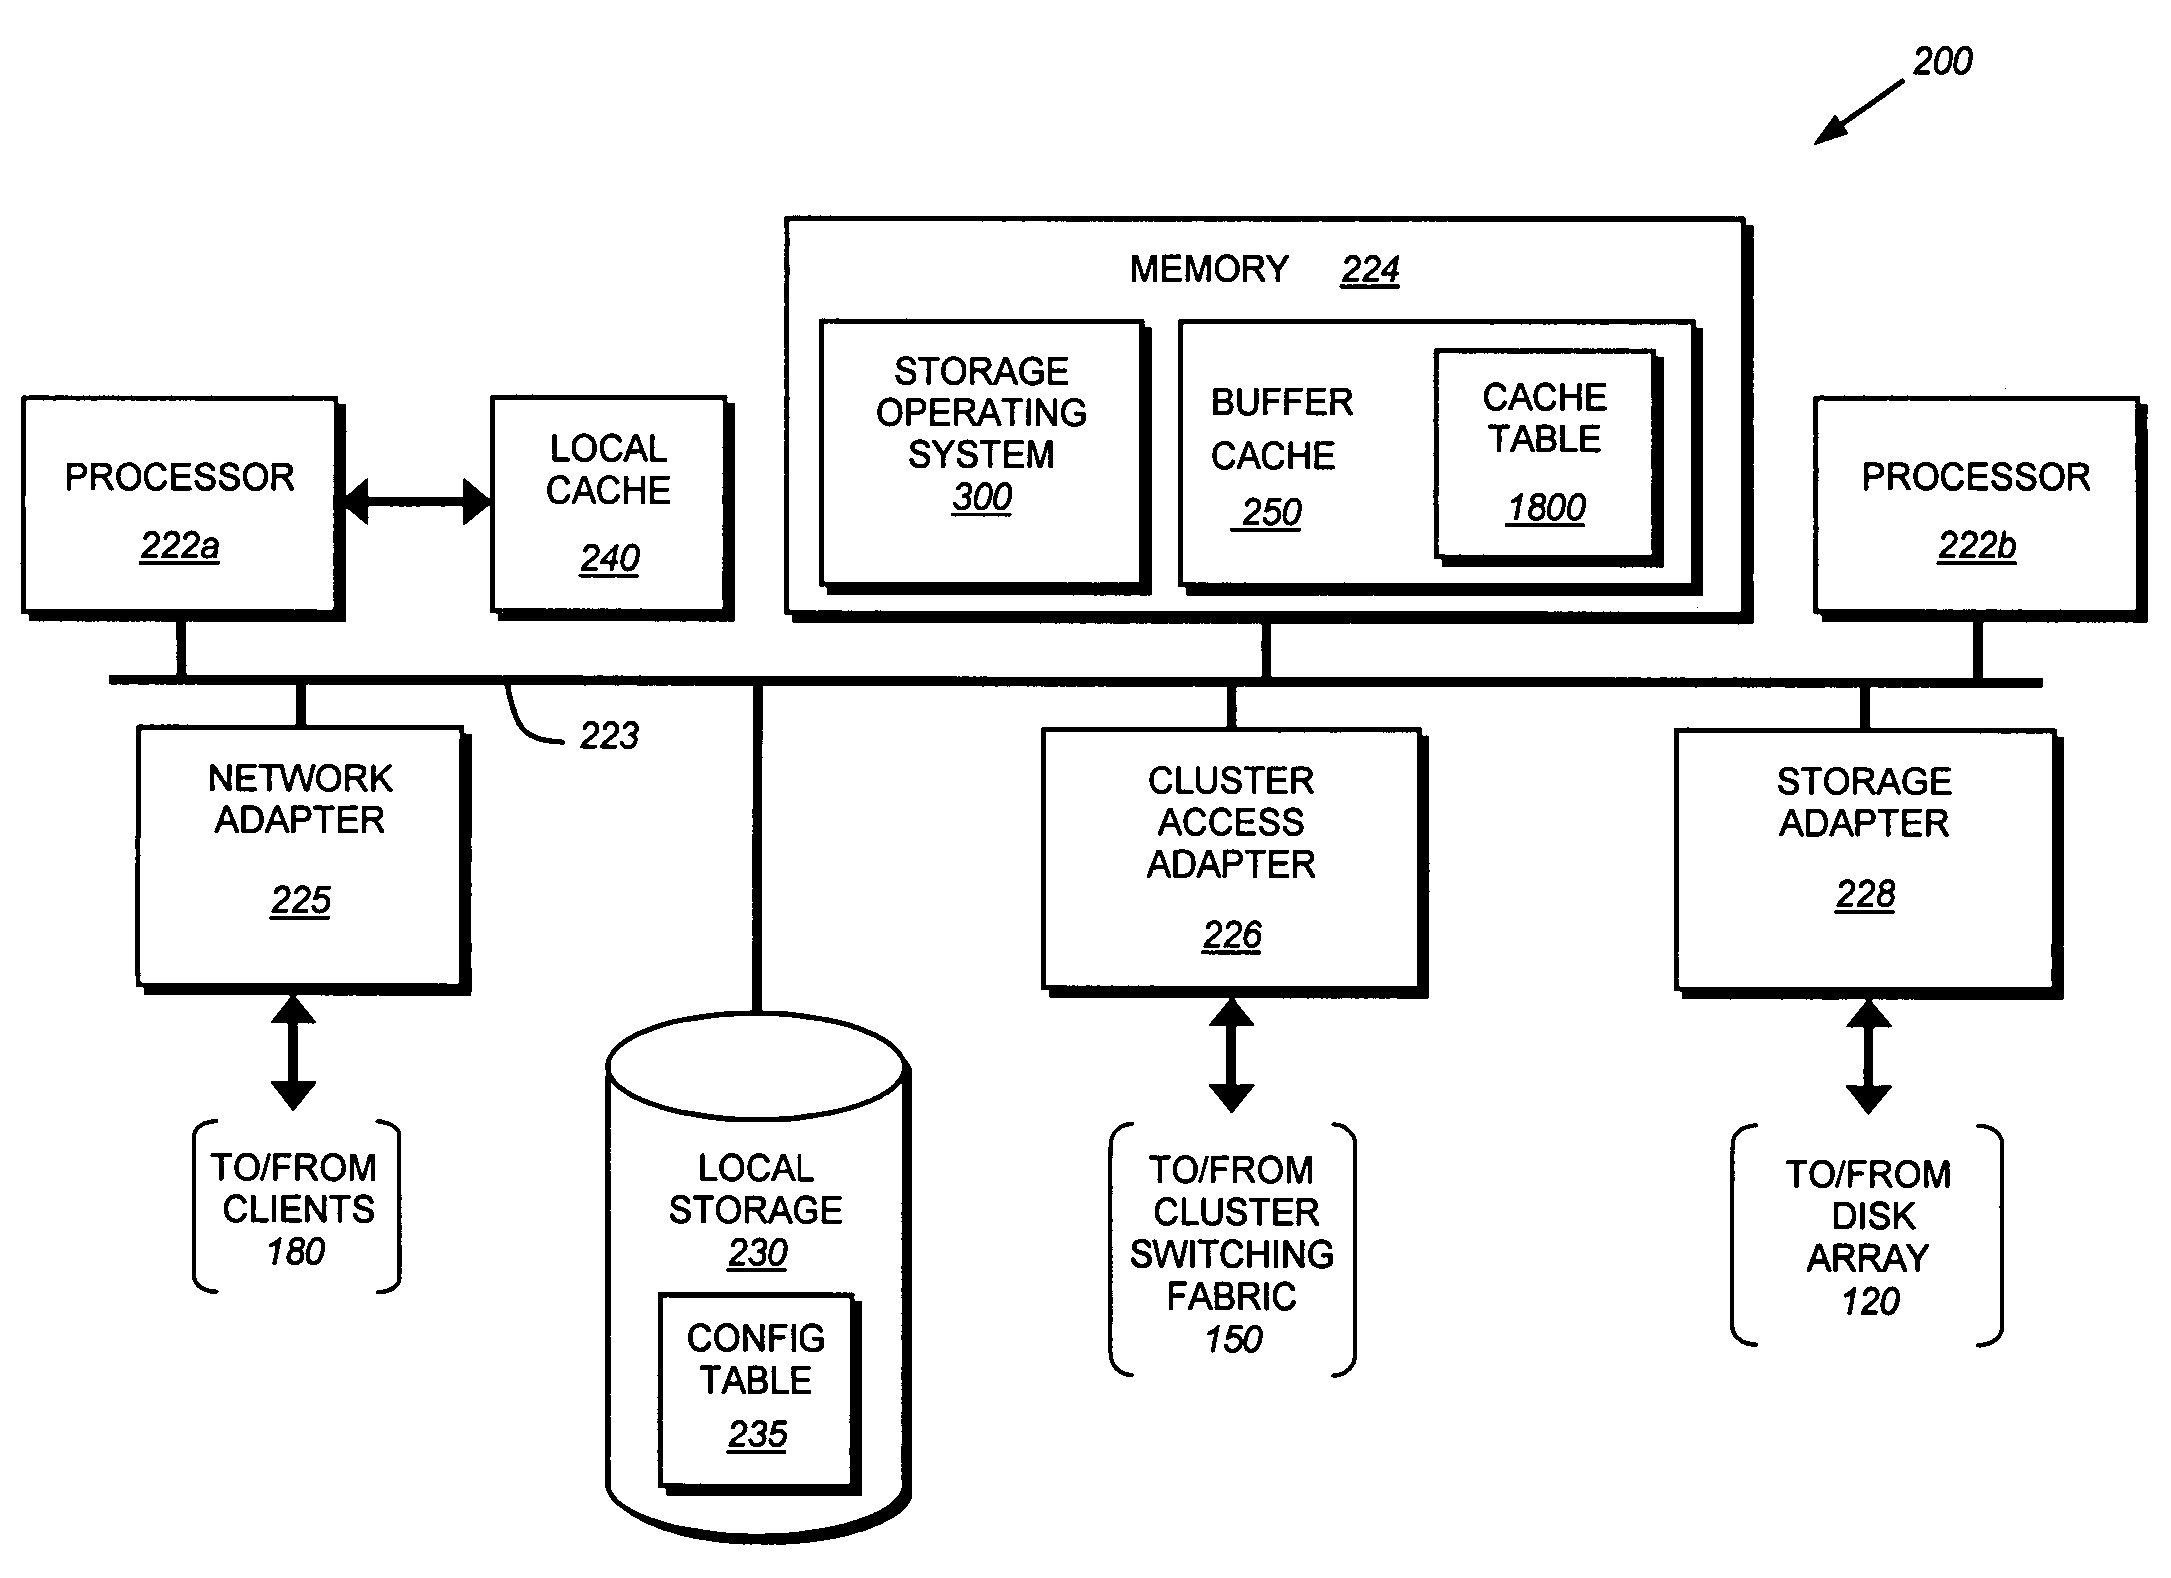 Lightweight coherency control protocol for clustered storage system